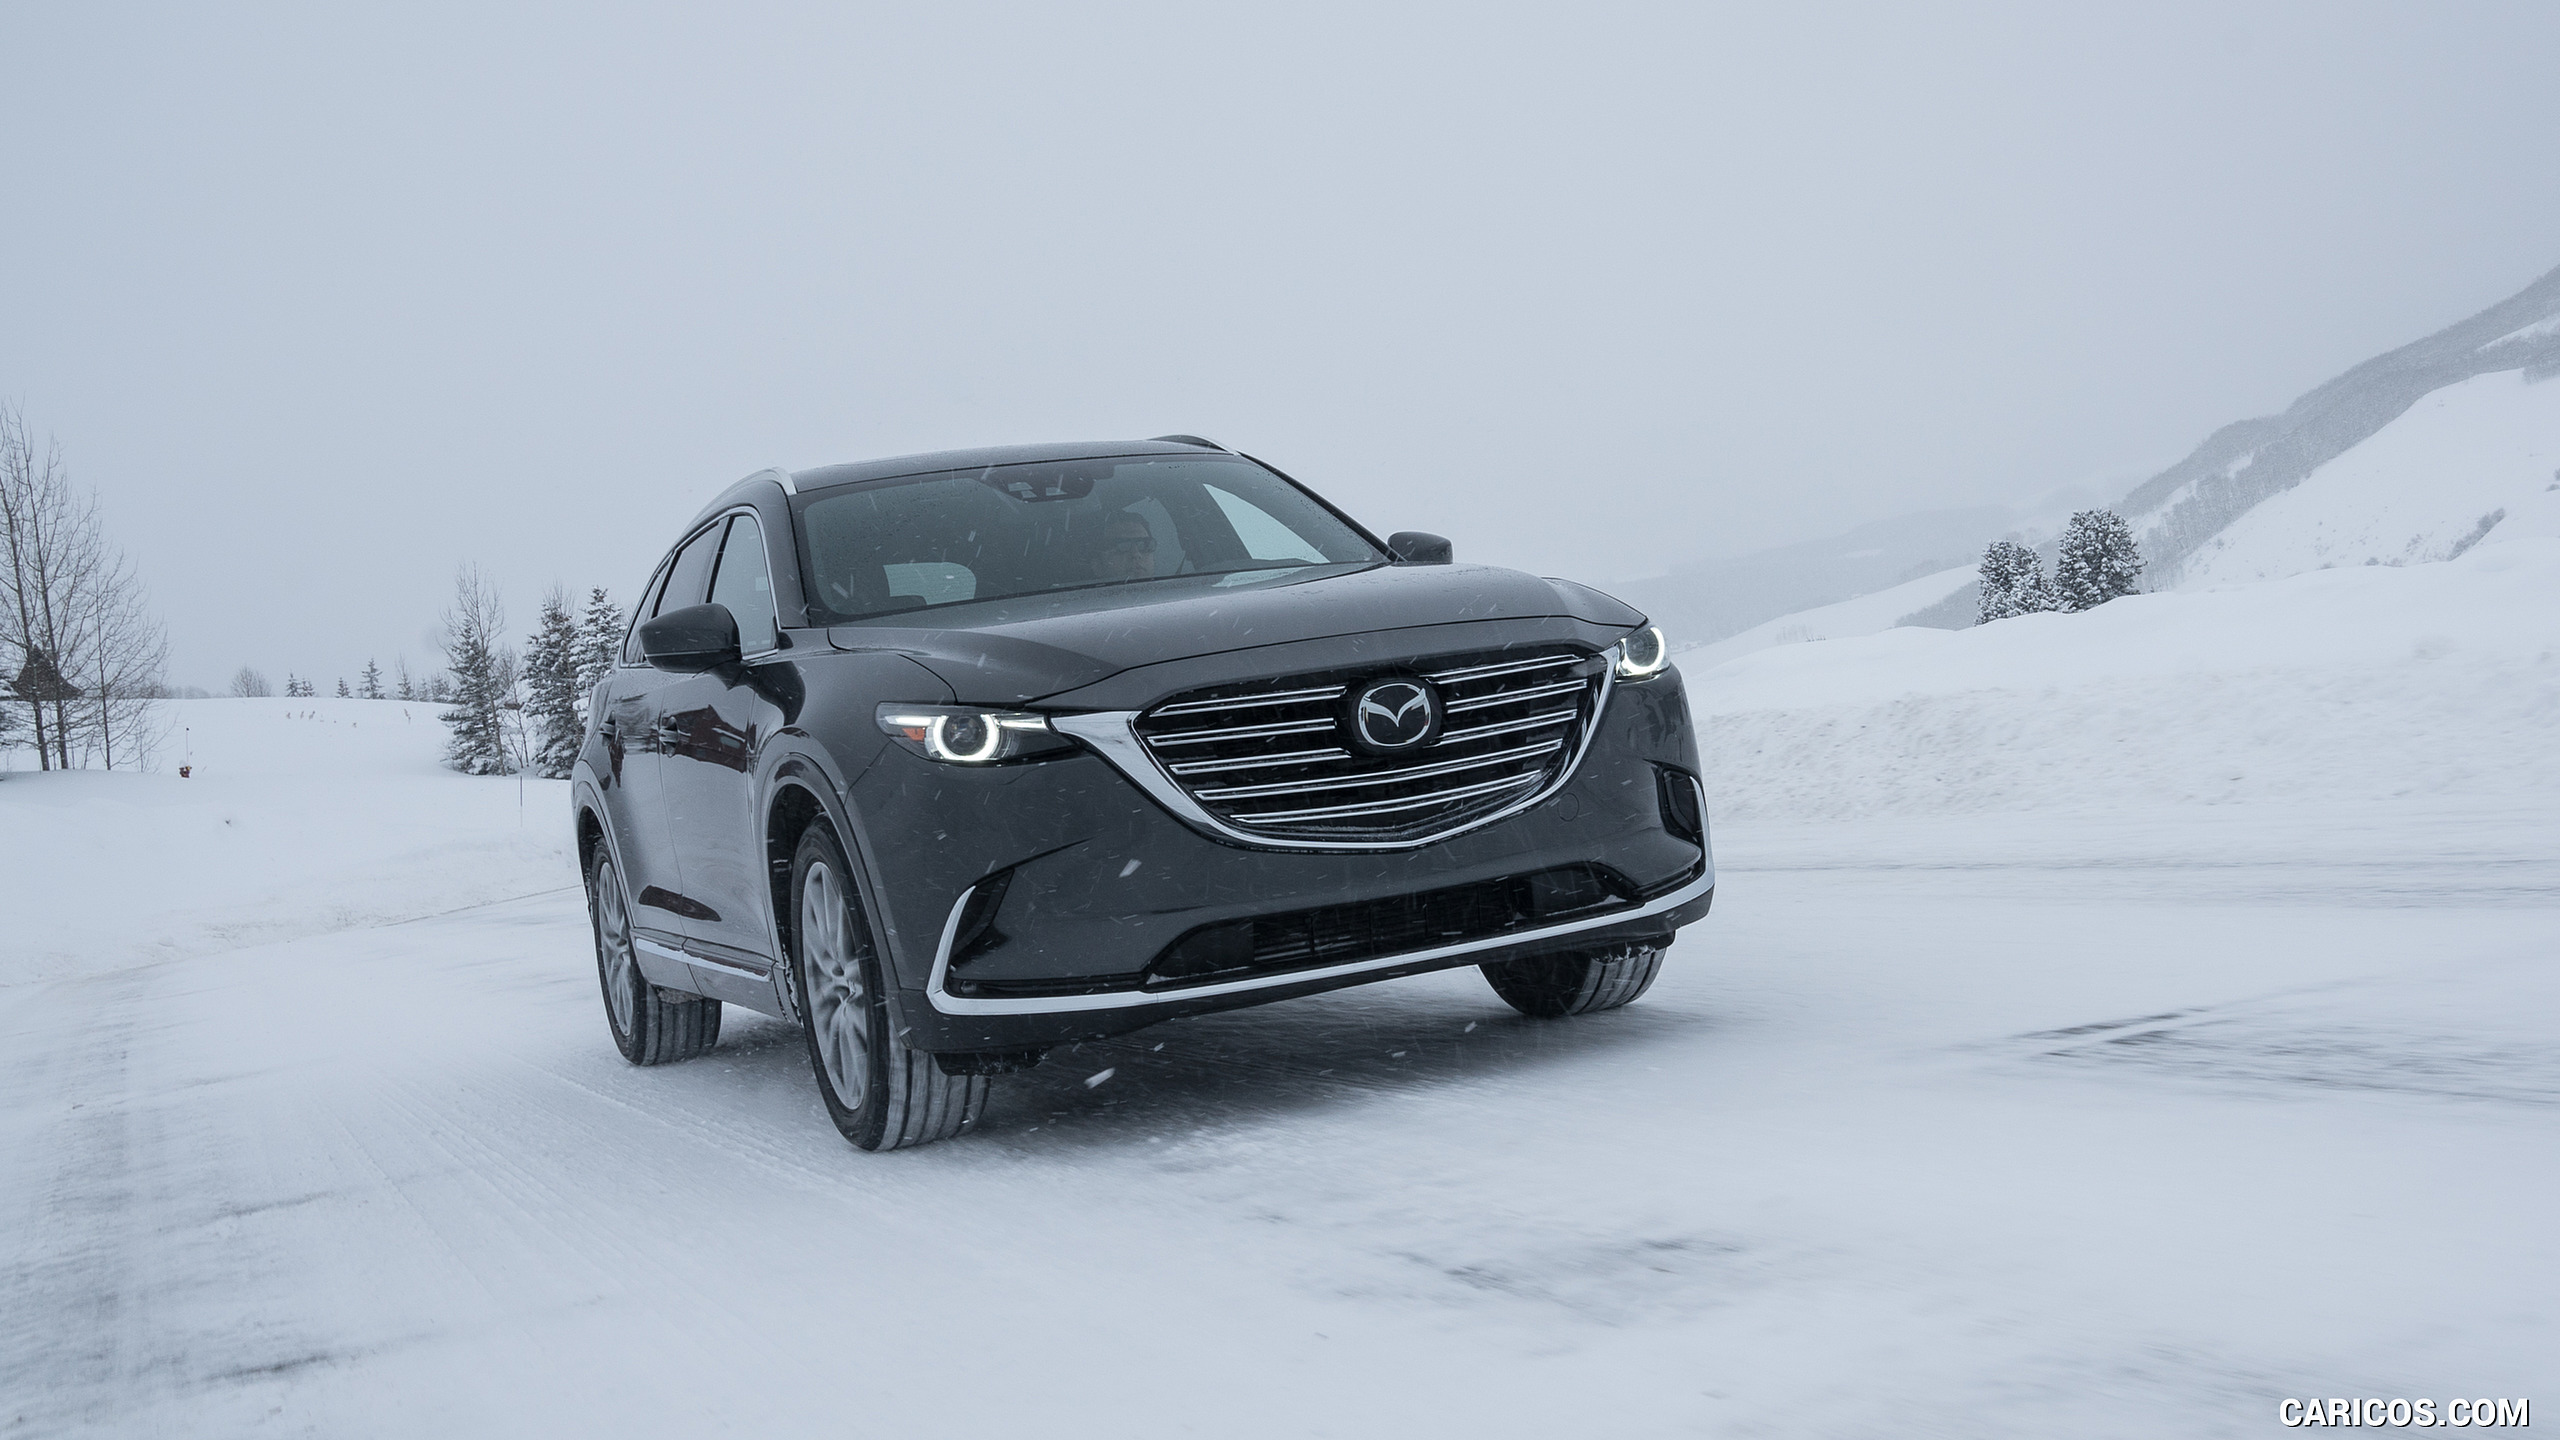 2016 Mazda CX-9 in Snow - Front, #63 of 69